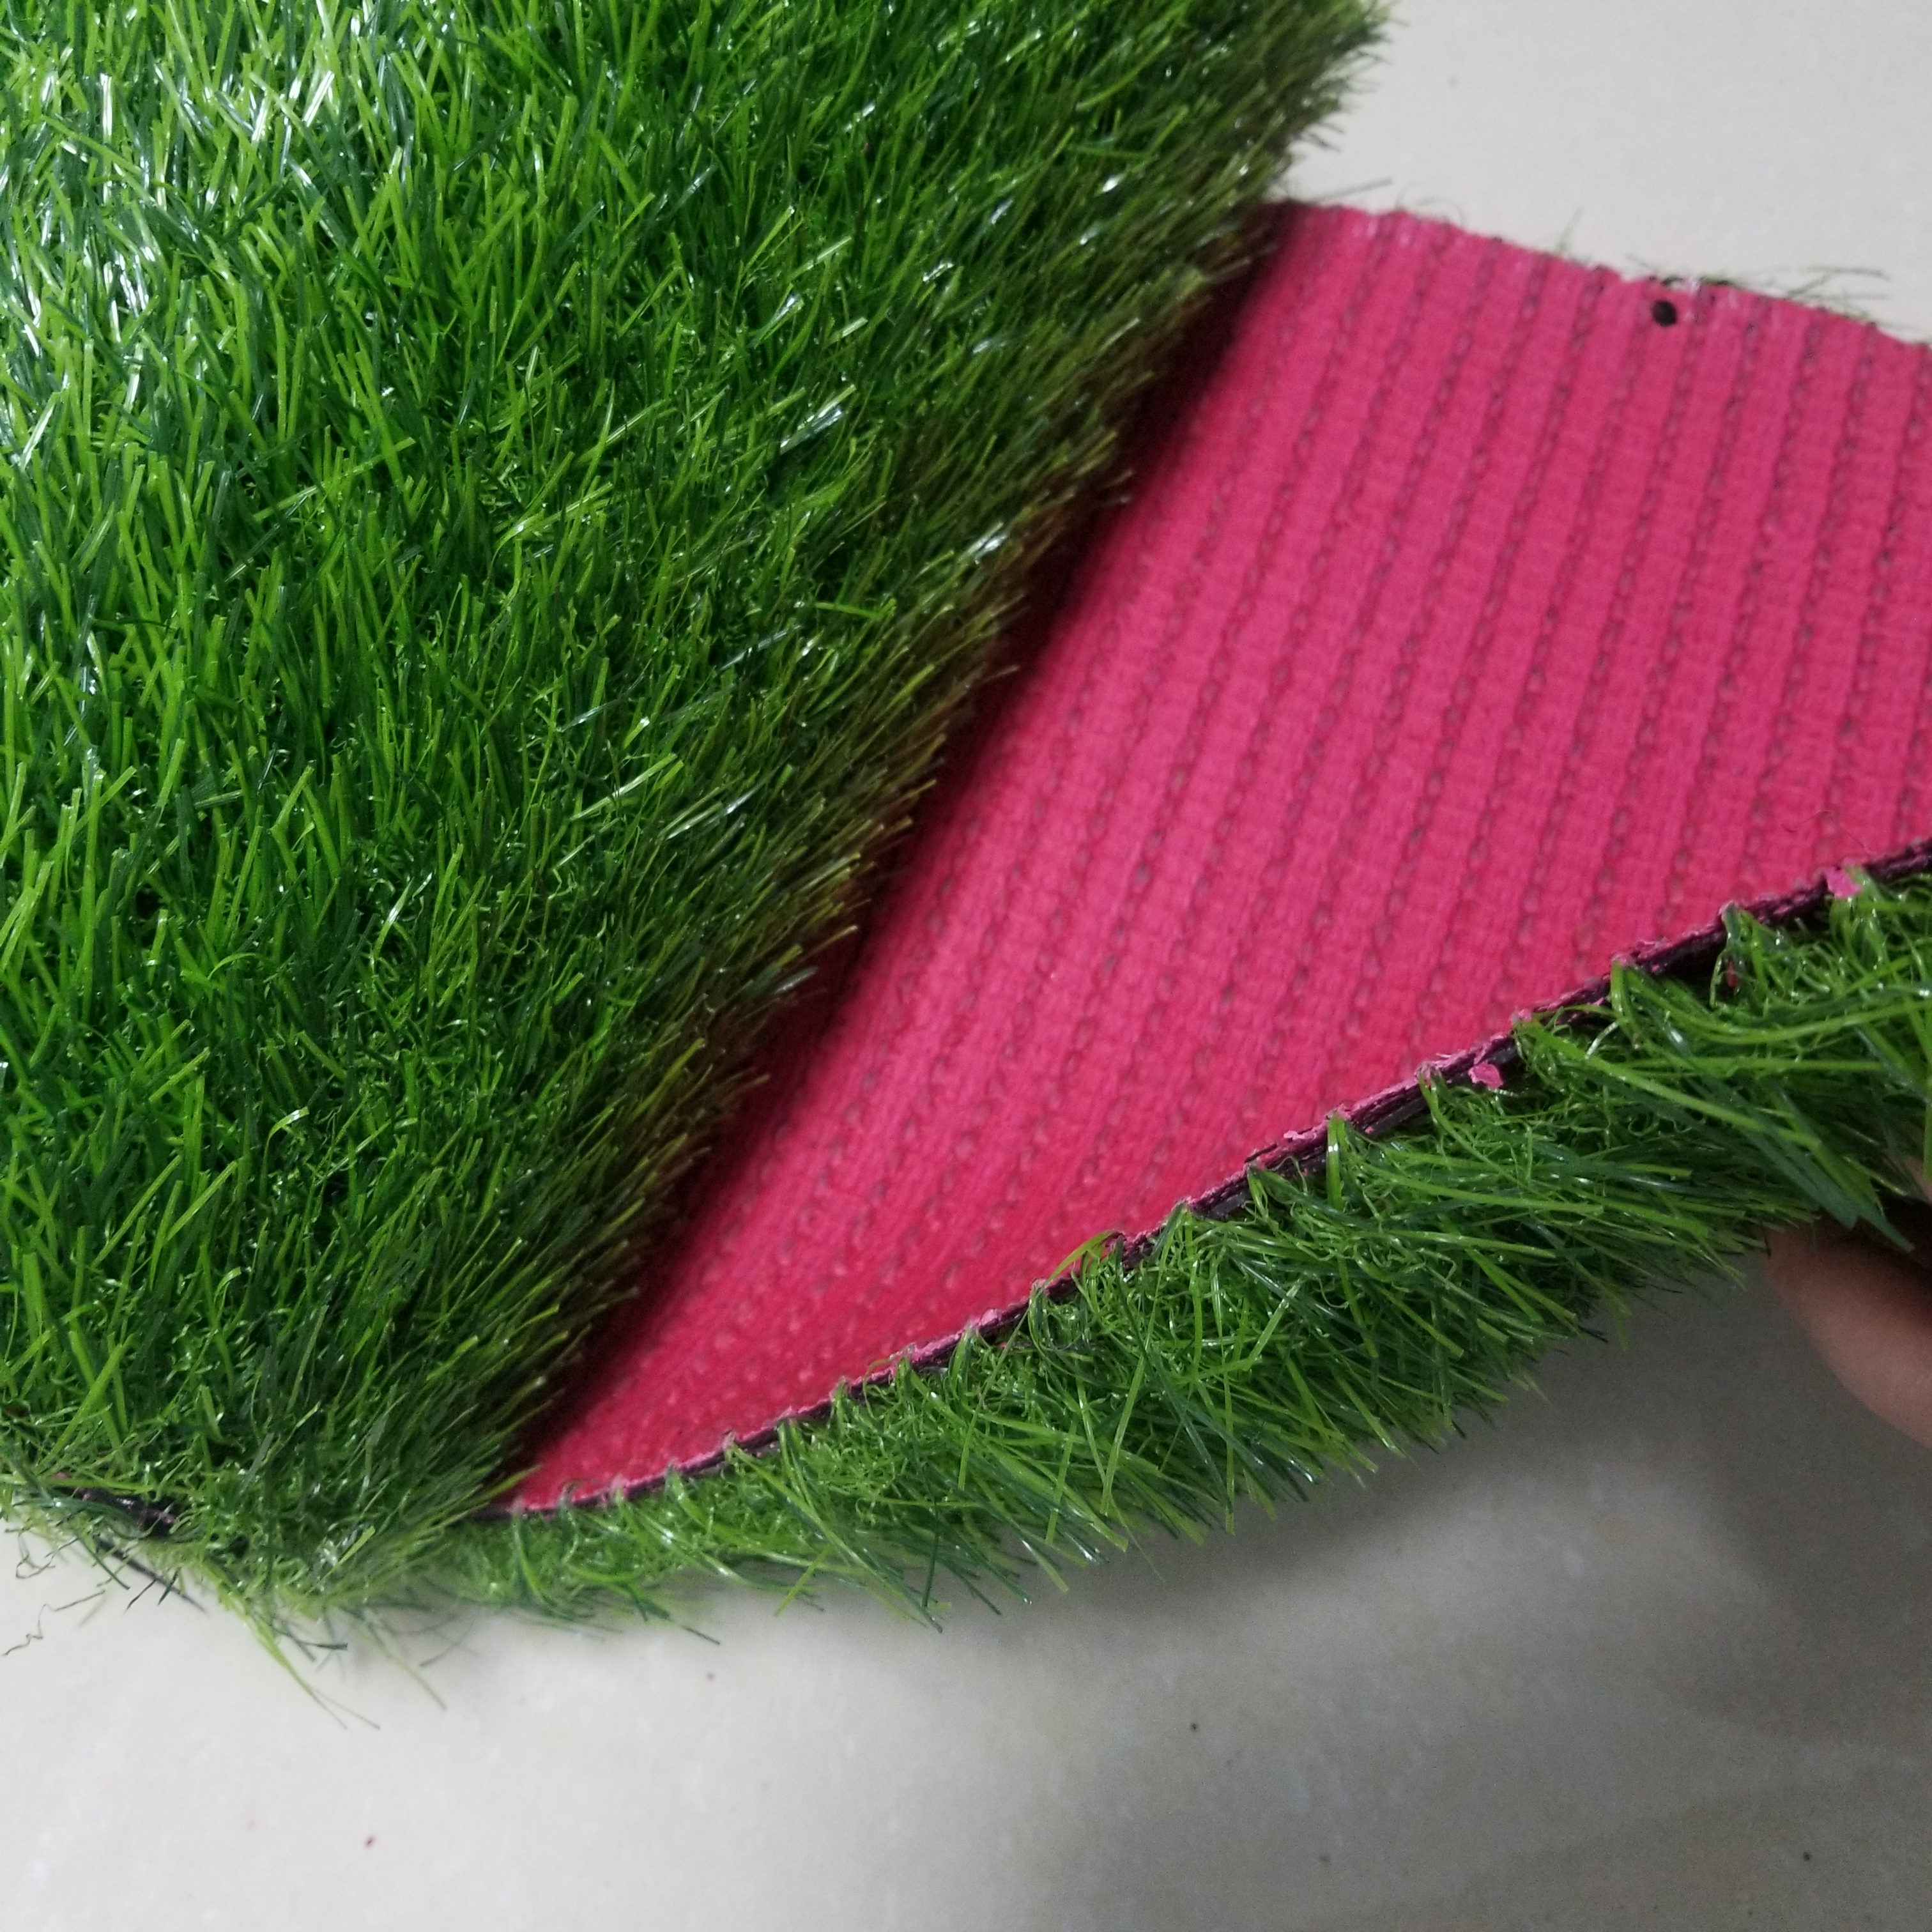 Cheap Chinese Wall Decoration Carpet Landscape Mat Lawn Artificial Turf Plastic Grass Featured Image